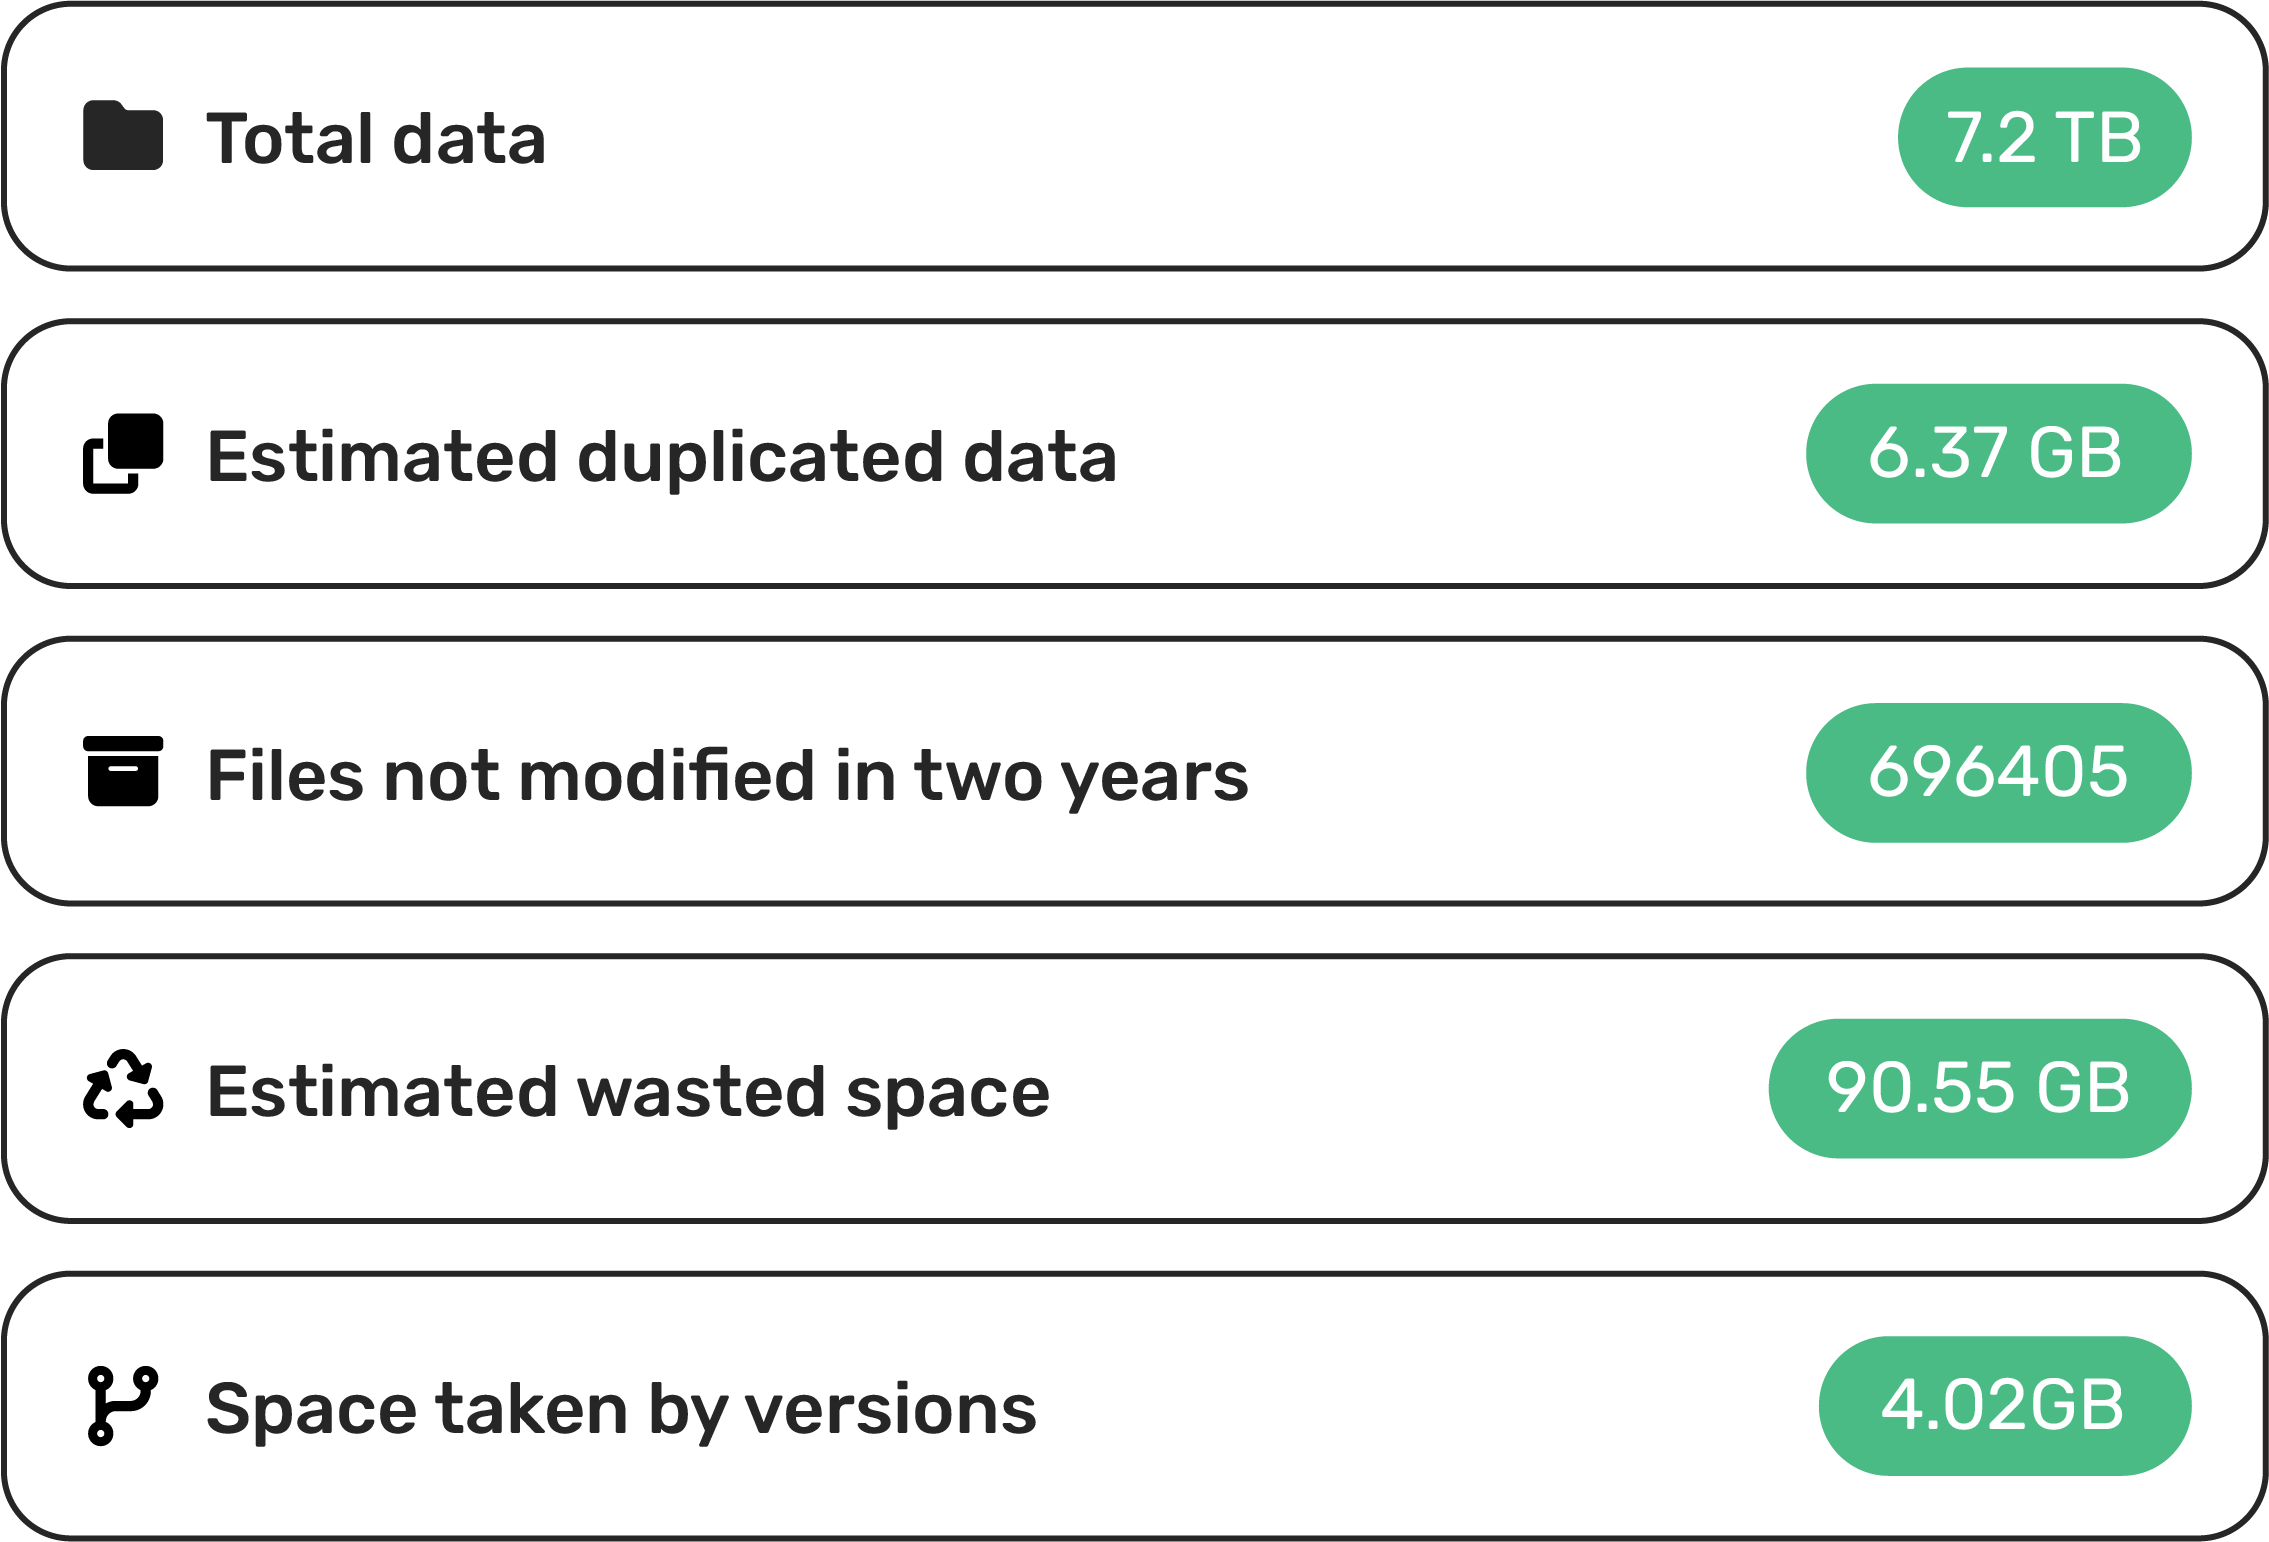 total data, duplicate data, files not modified in 2 years, estimated wasted space, space taken by versions